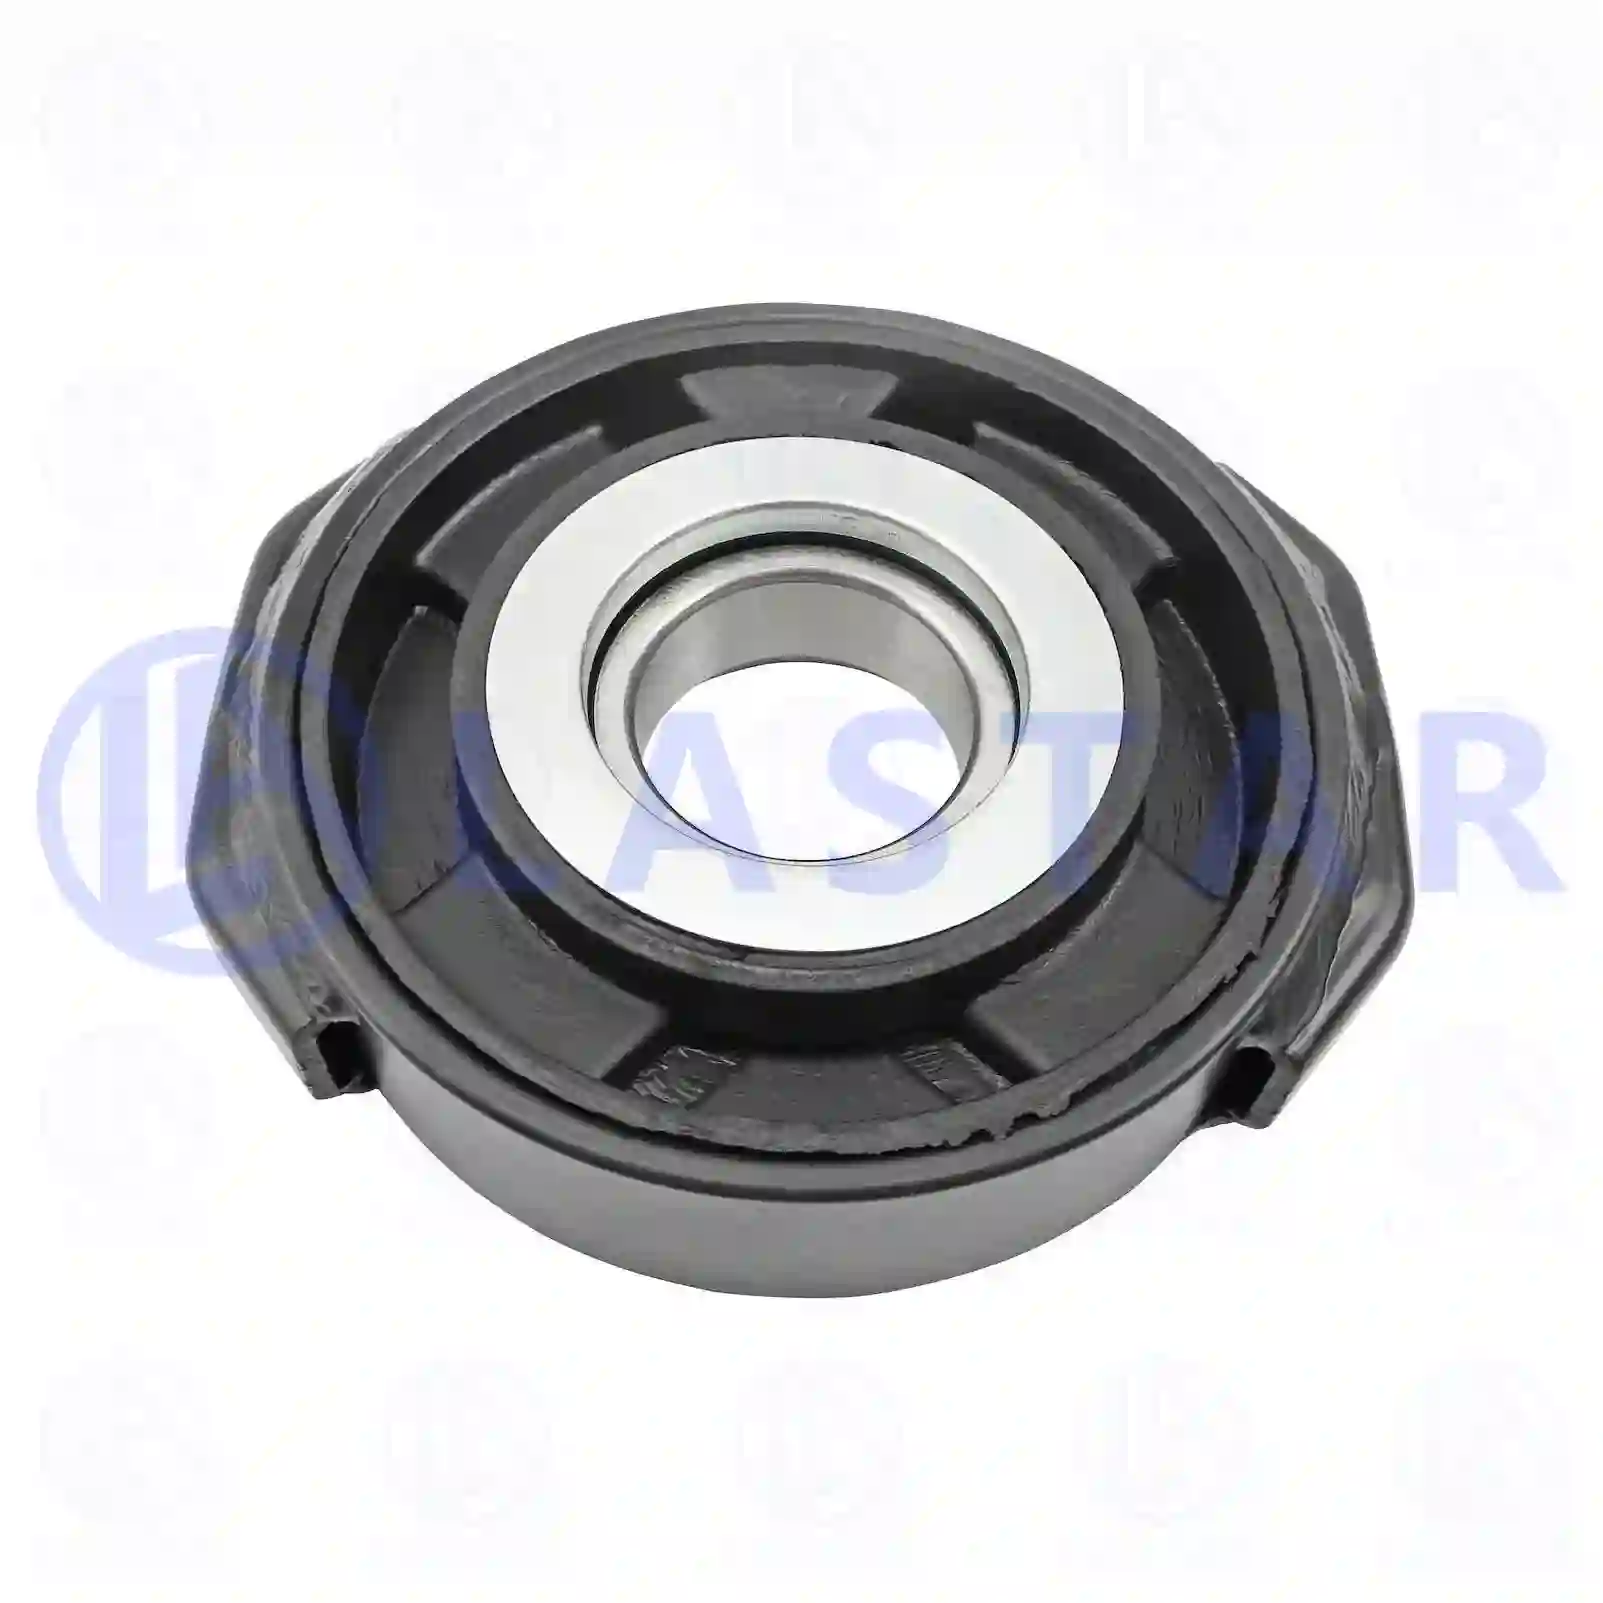 Center bearing, 77734255, 9734100022 ||  77734255 Lastar Spare Part | Truck Spare Parts, Auotomotive Spare Parts Center bearing, 77734255, 9734100022 ||  77734255 Lastar Spare Part | Truck Spare Parts, Auotomotive Spare Parts